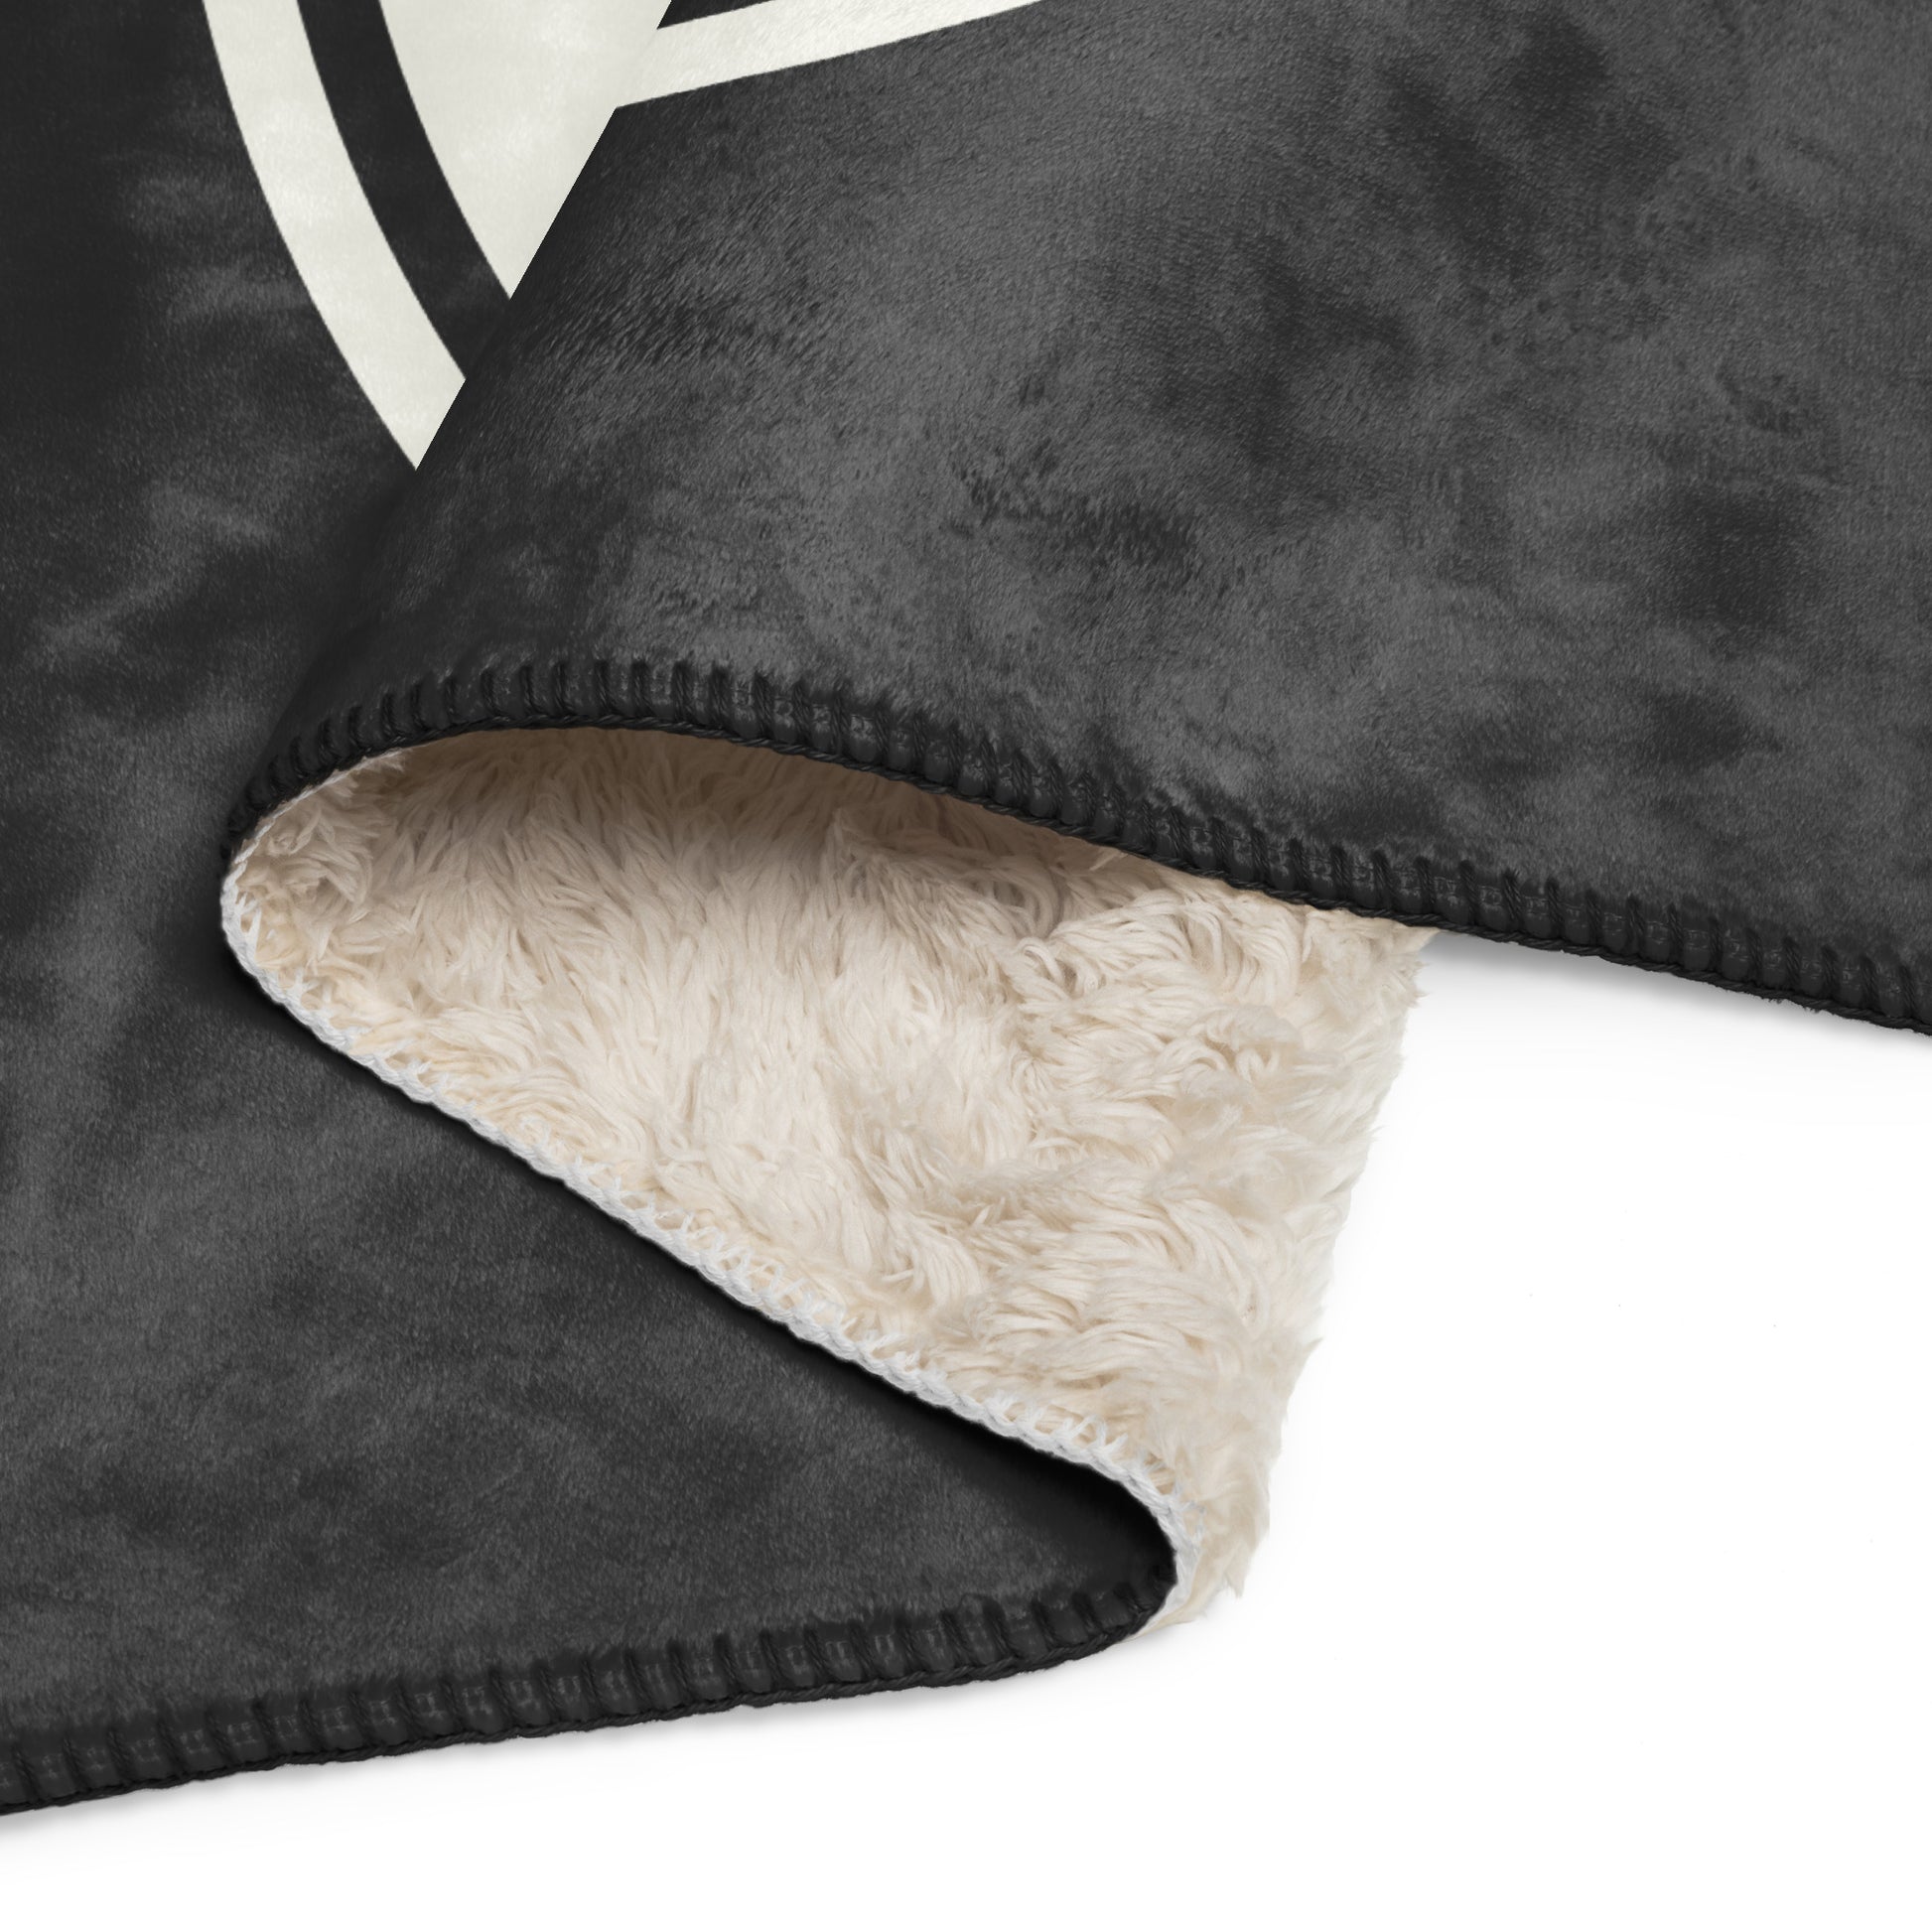 Unique Travel Gift Sherpa Blanket - White Oval • LHR London • YHM Designs - Image 08